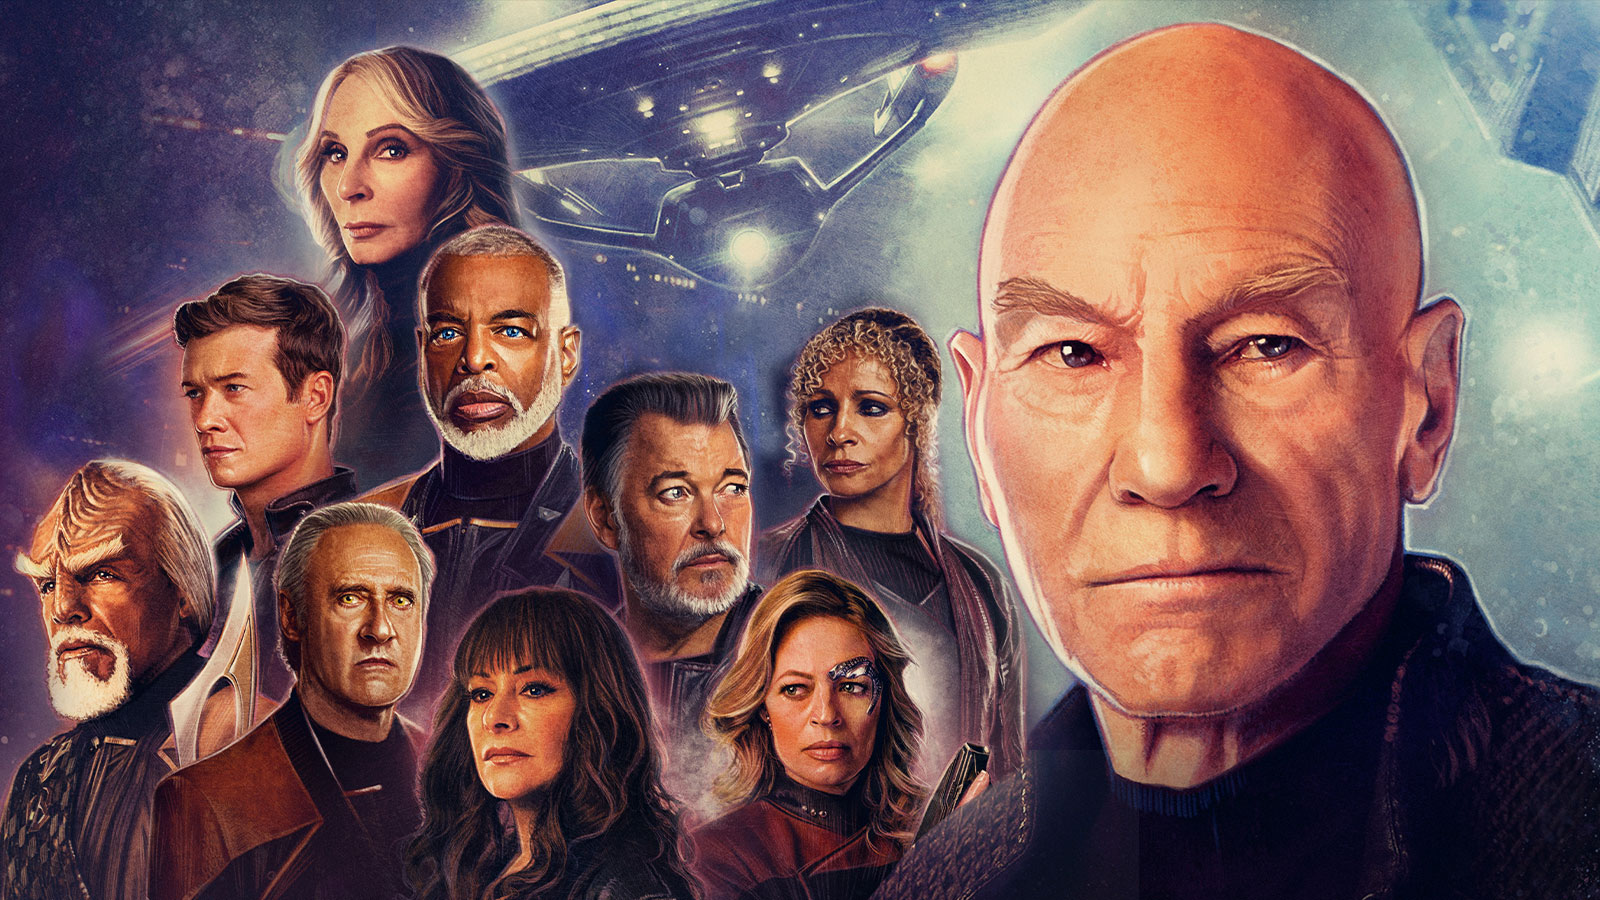 Star Trek: Picard Season 3 premiere “The Next Generation” Review: The cast of TNG is back… and we’re here for it